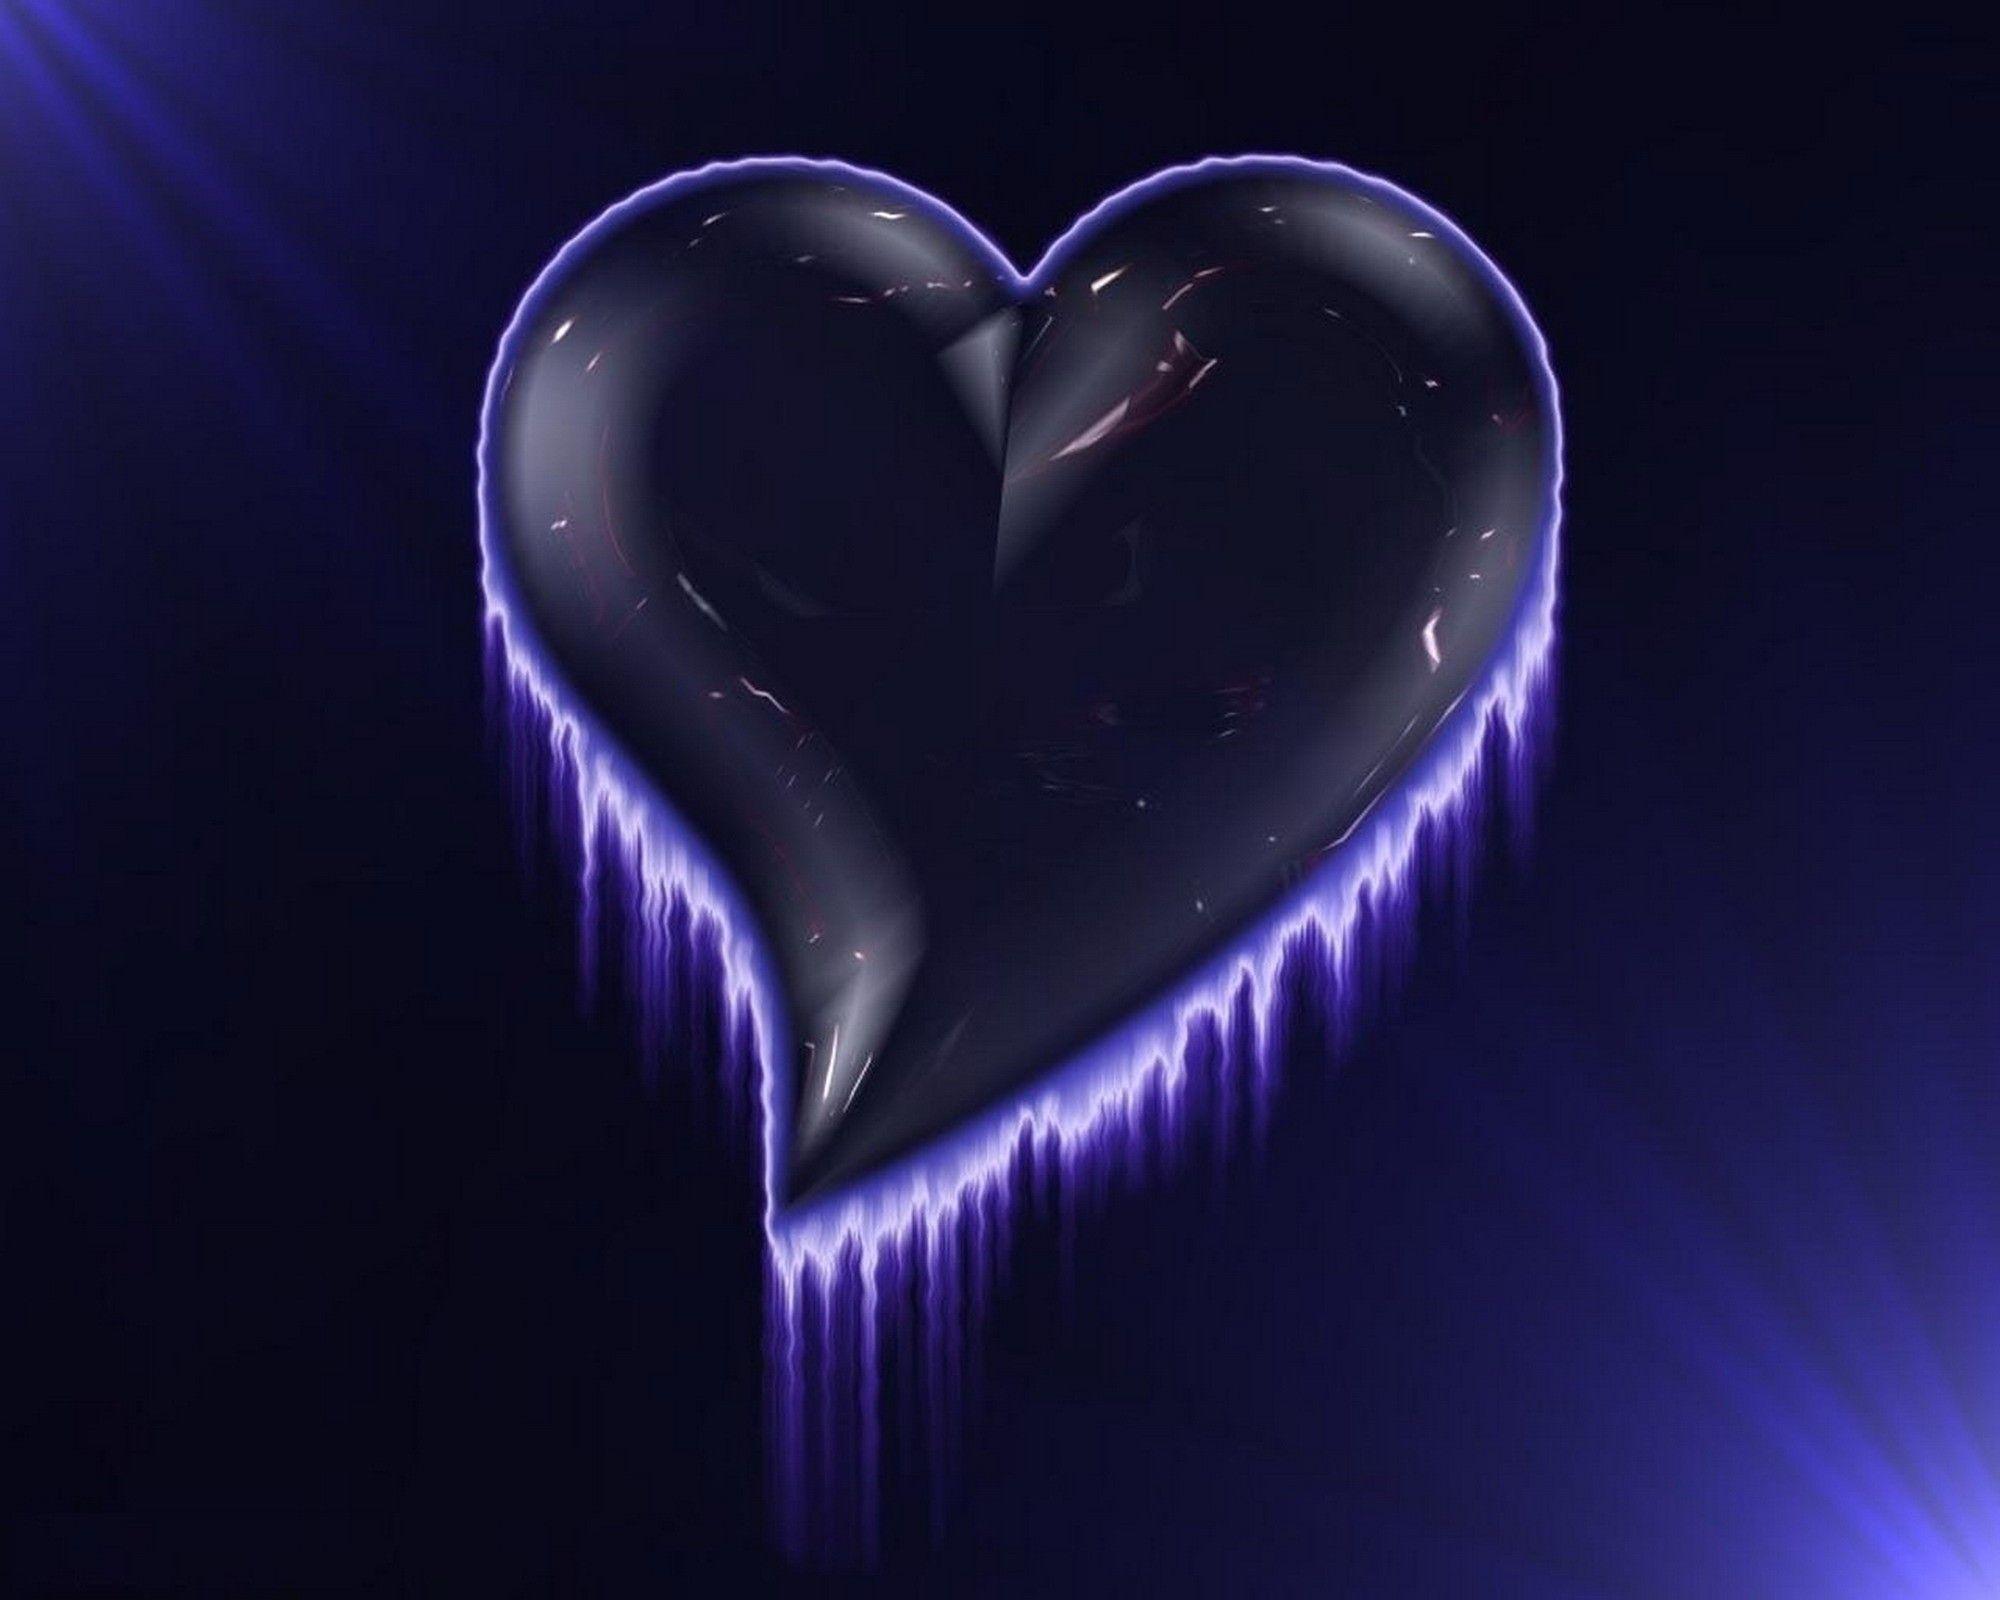 Hearts With Black Background